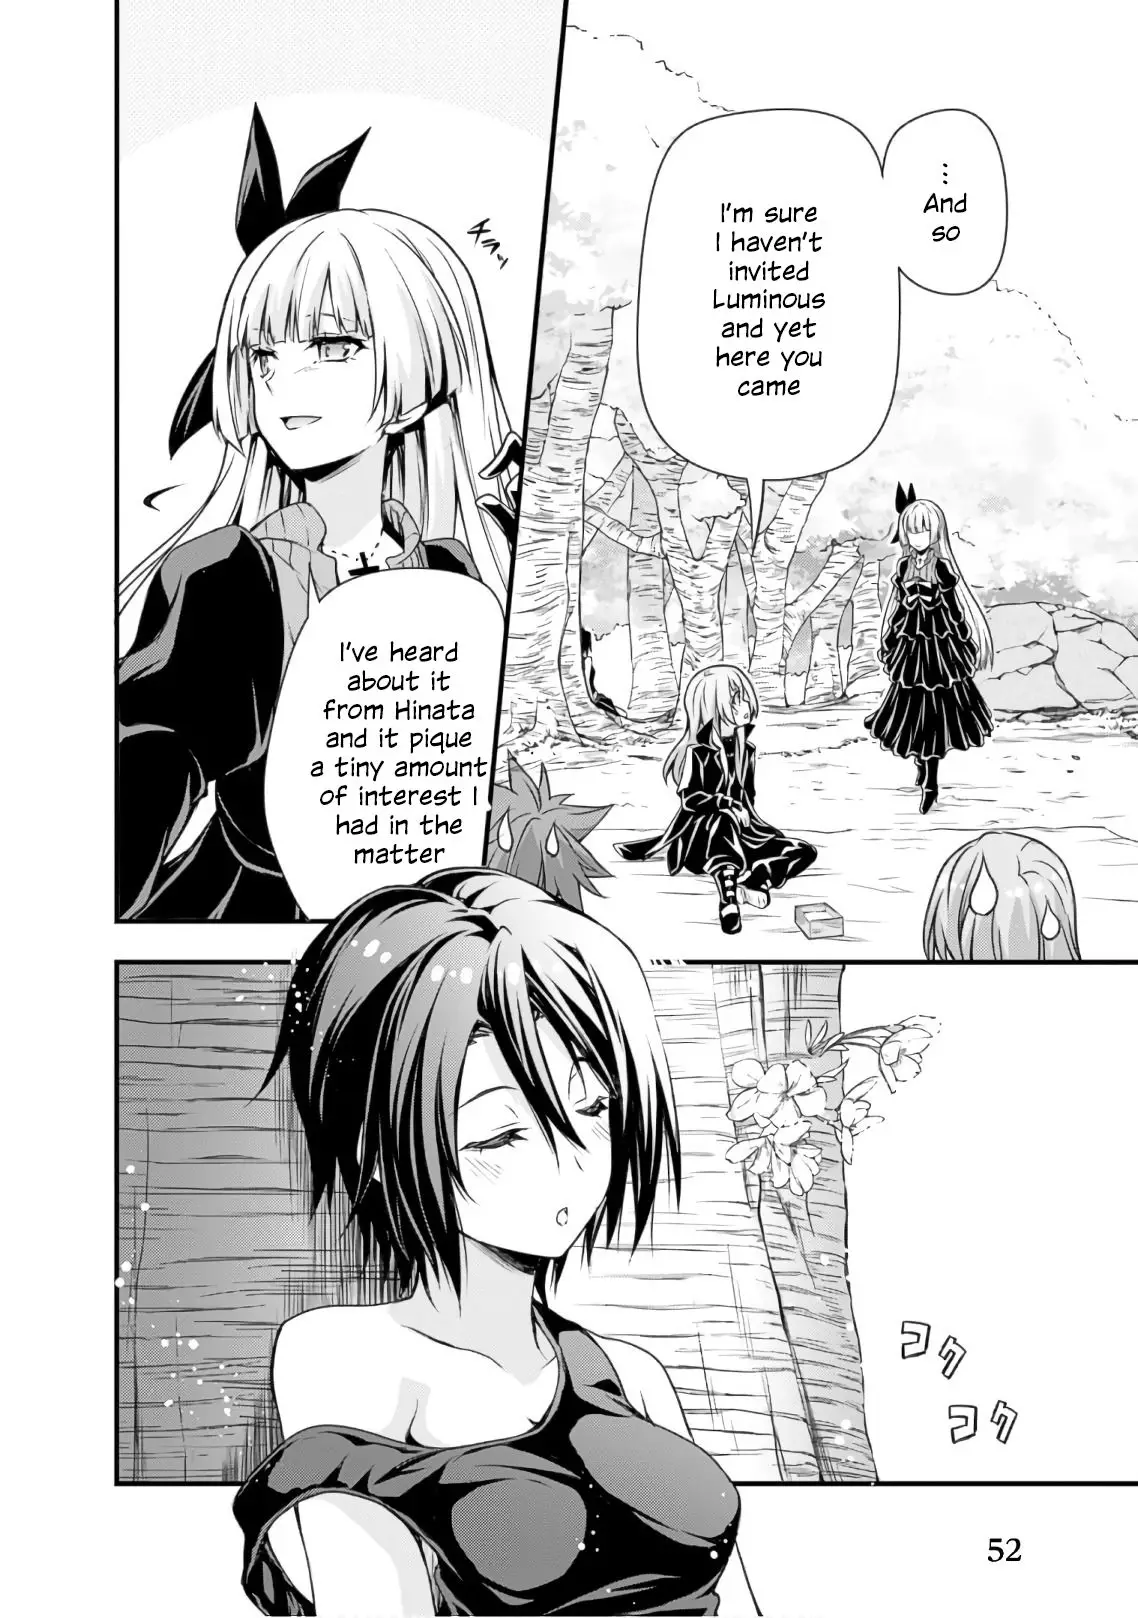 Tensei Shitara Slime Datta Ken: The Ways of Strolling in the Demon Country - 22 page 018